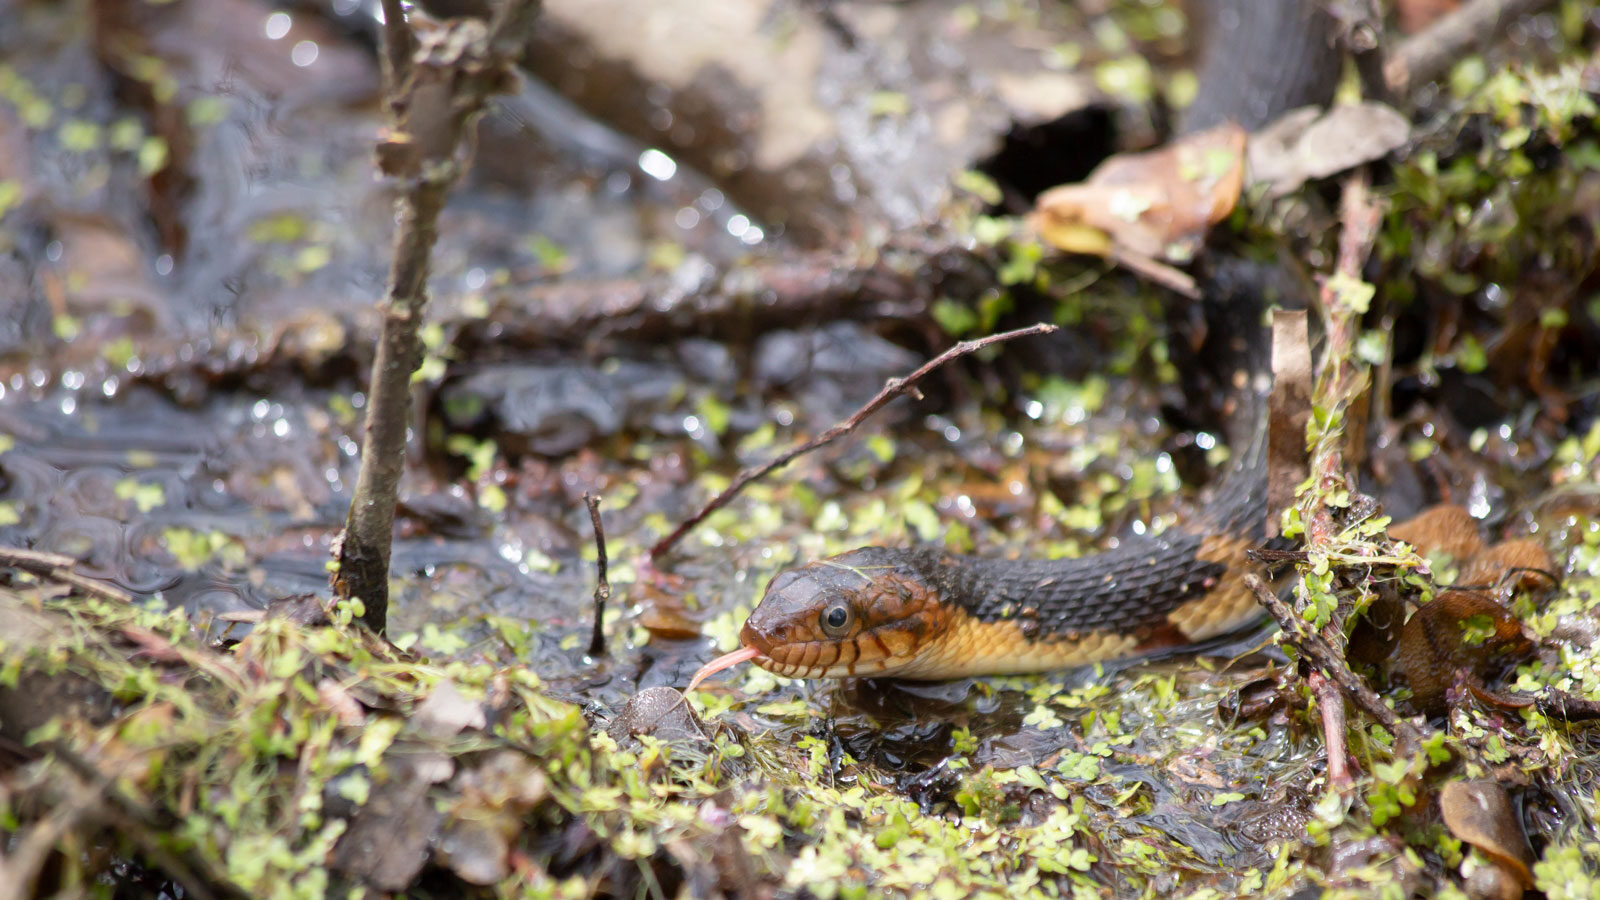 Broad-banded water snake swimming in murky, shallow water